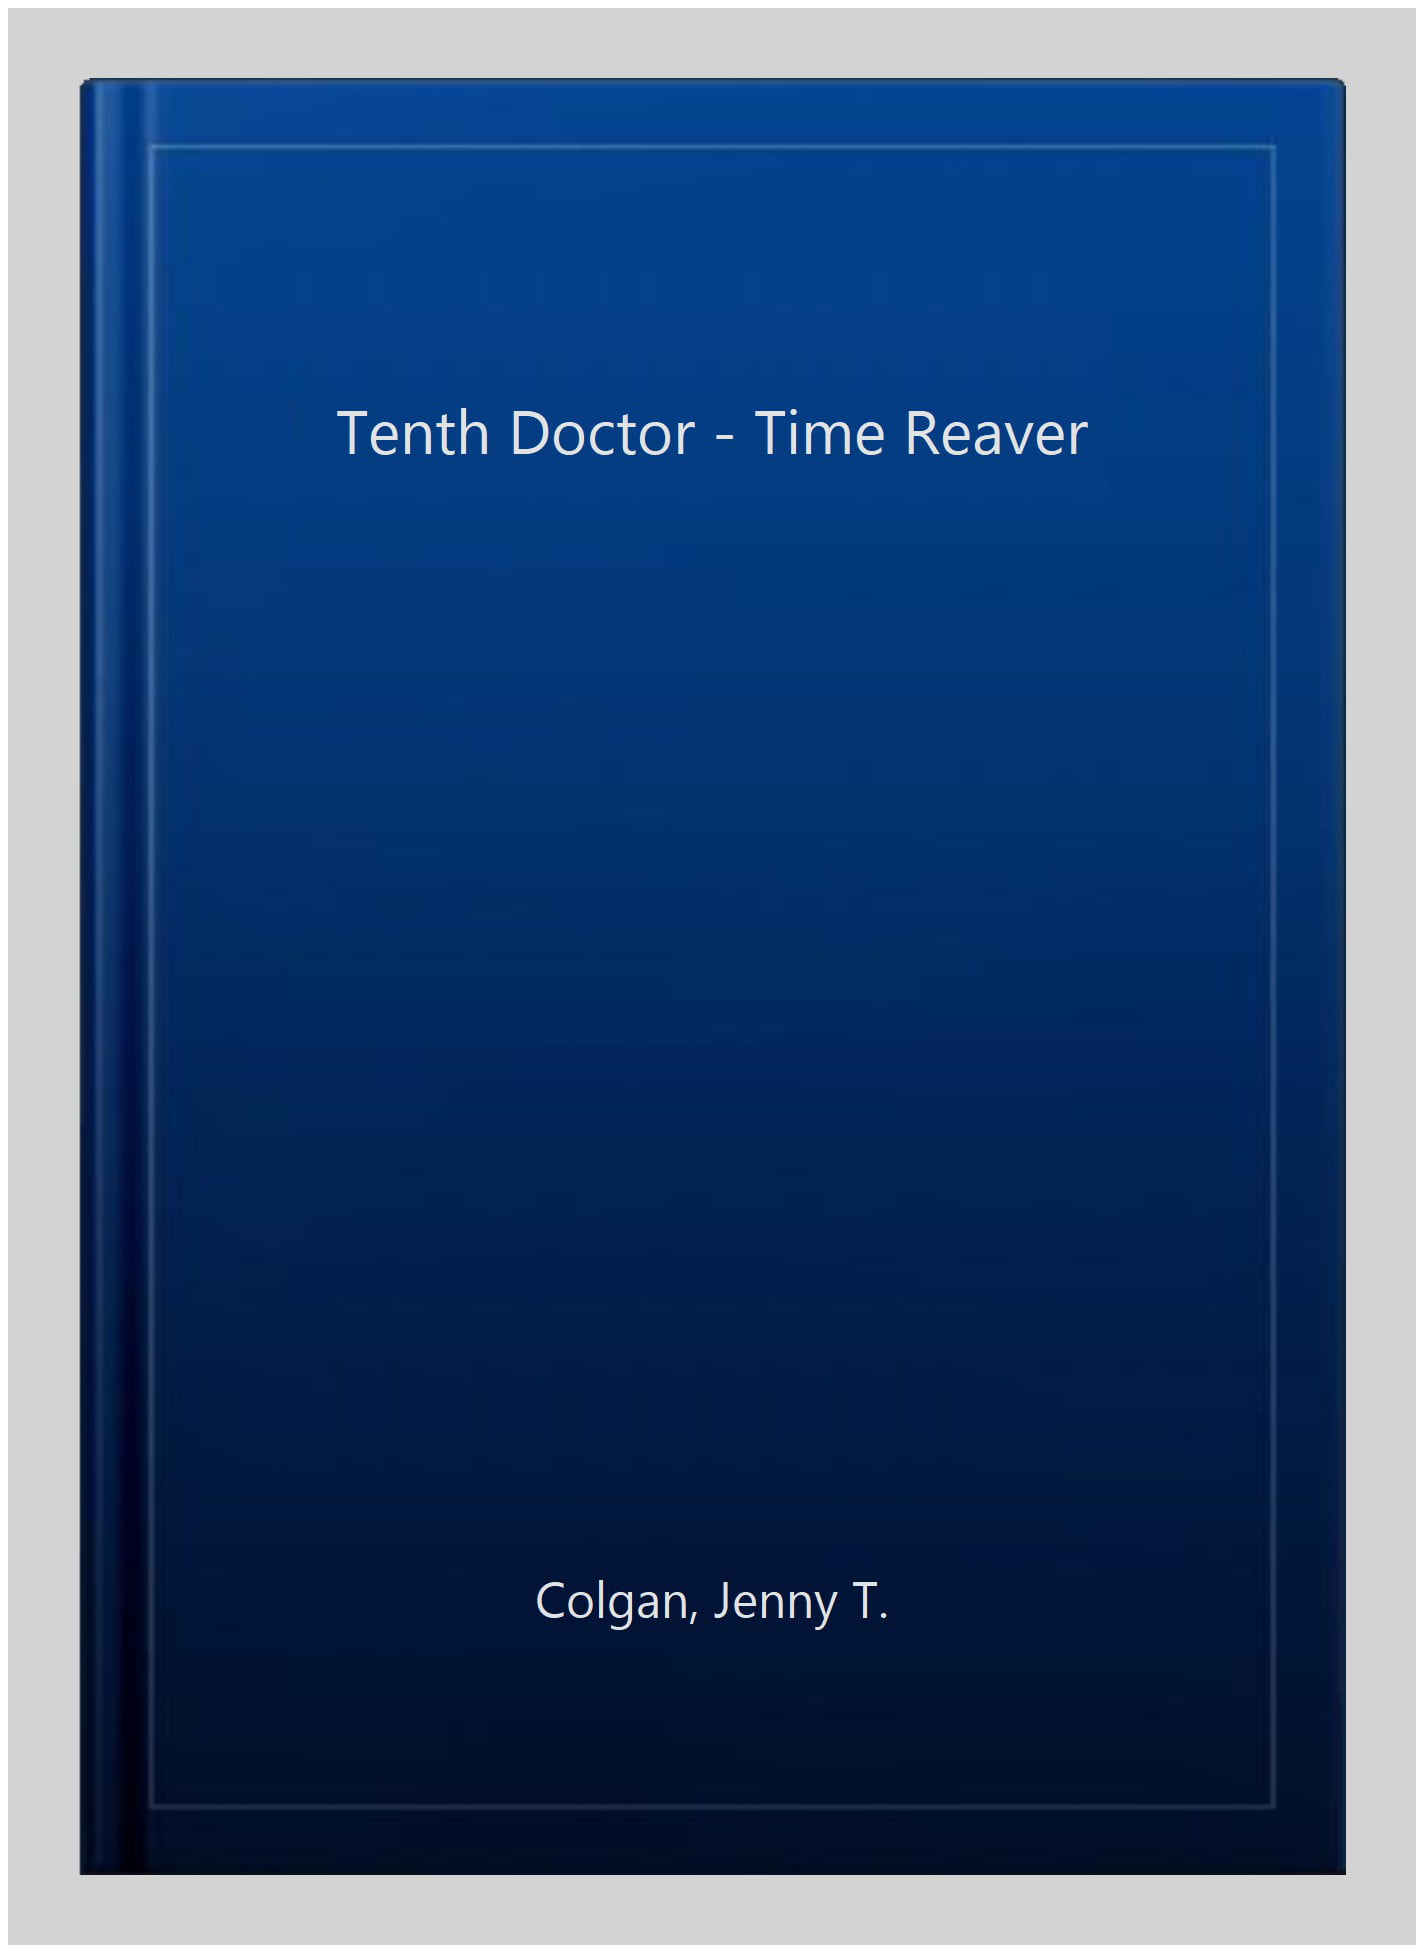 Time Reaver The Tenth Doctor 